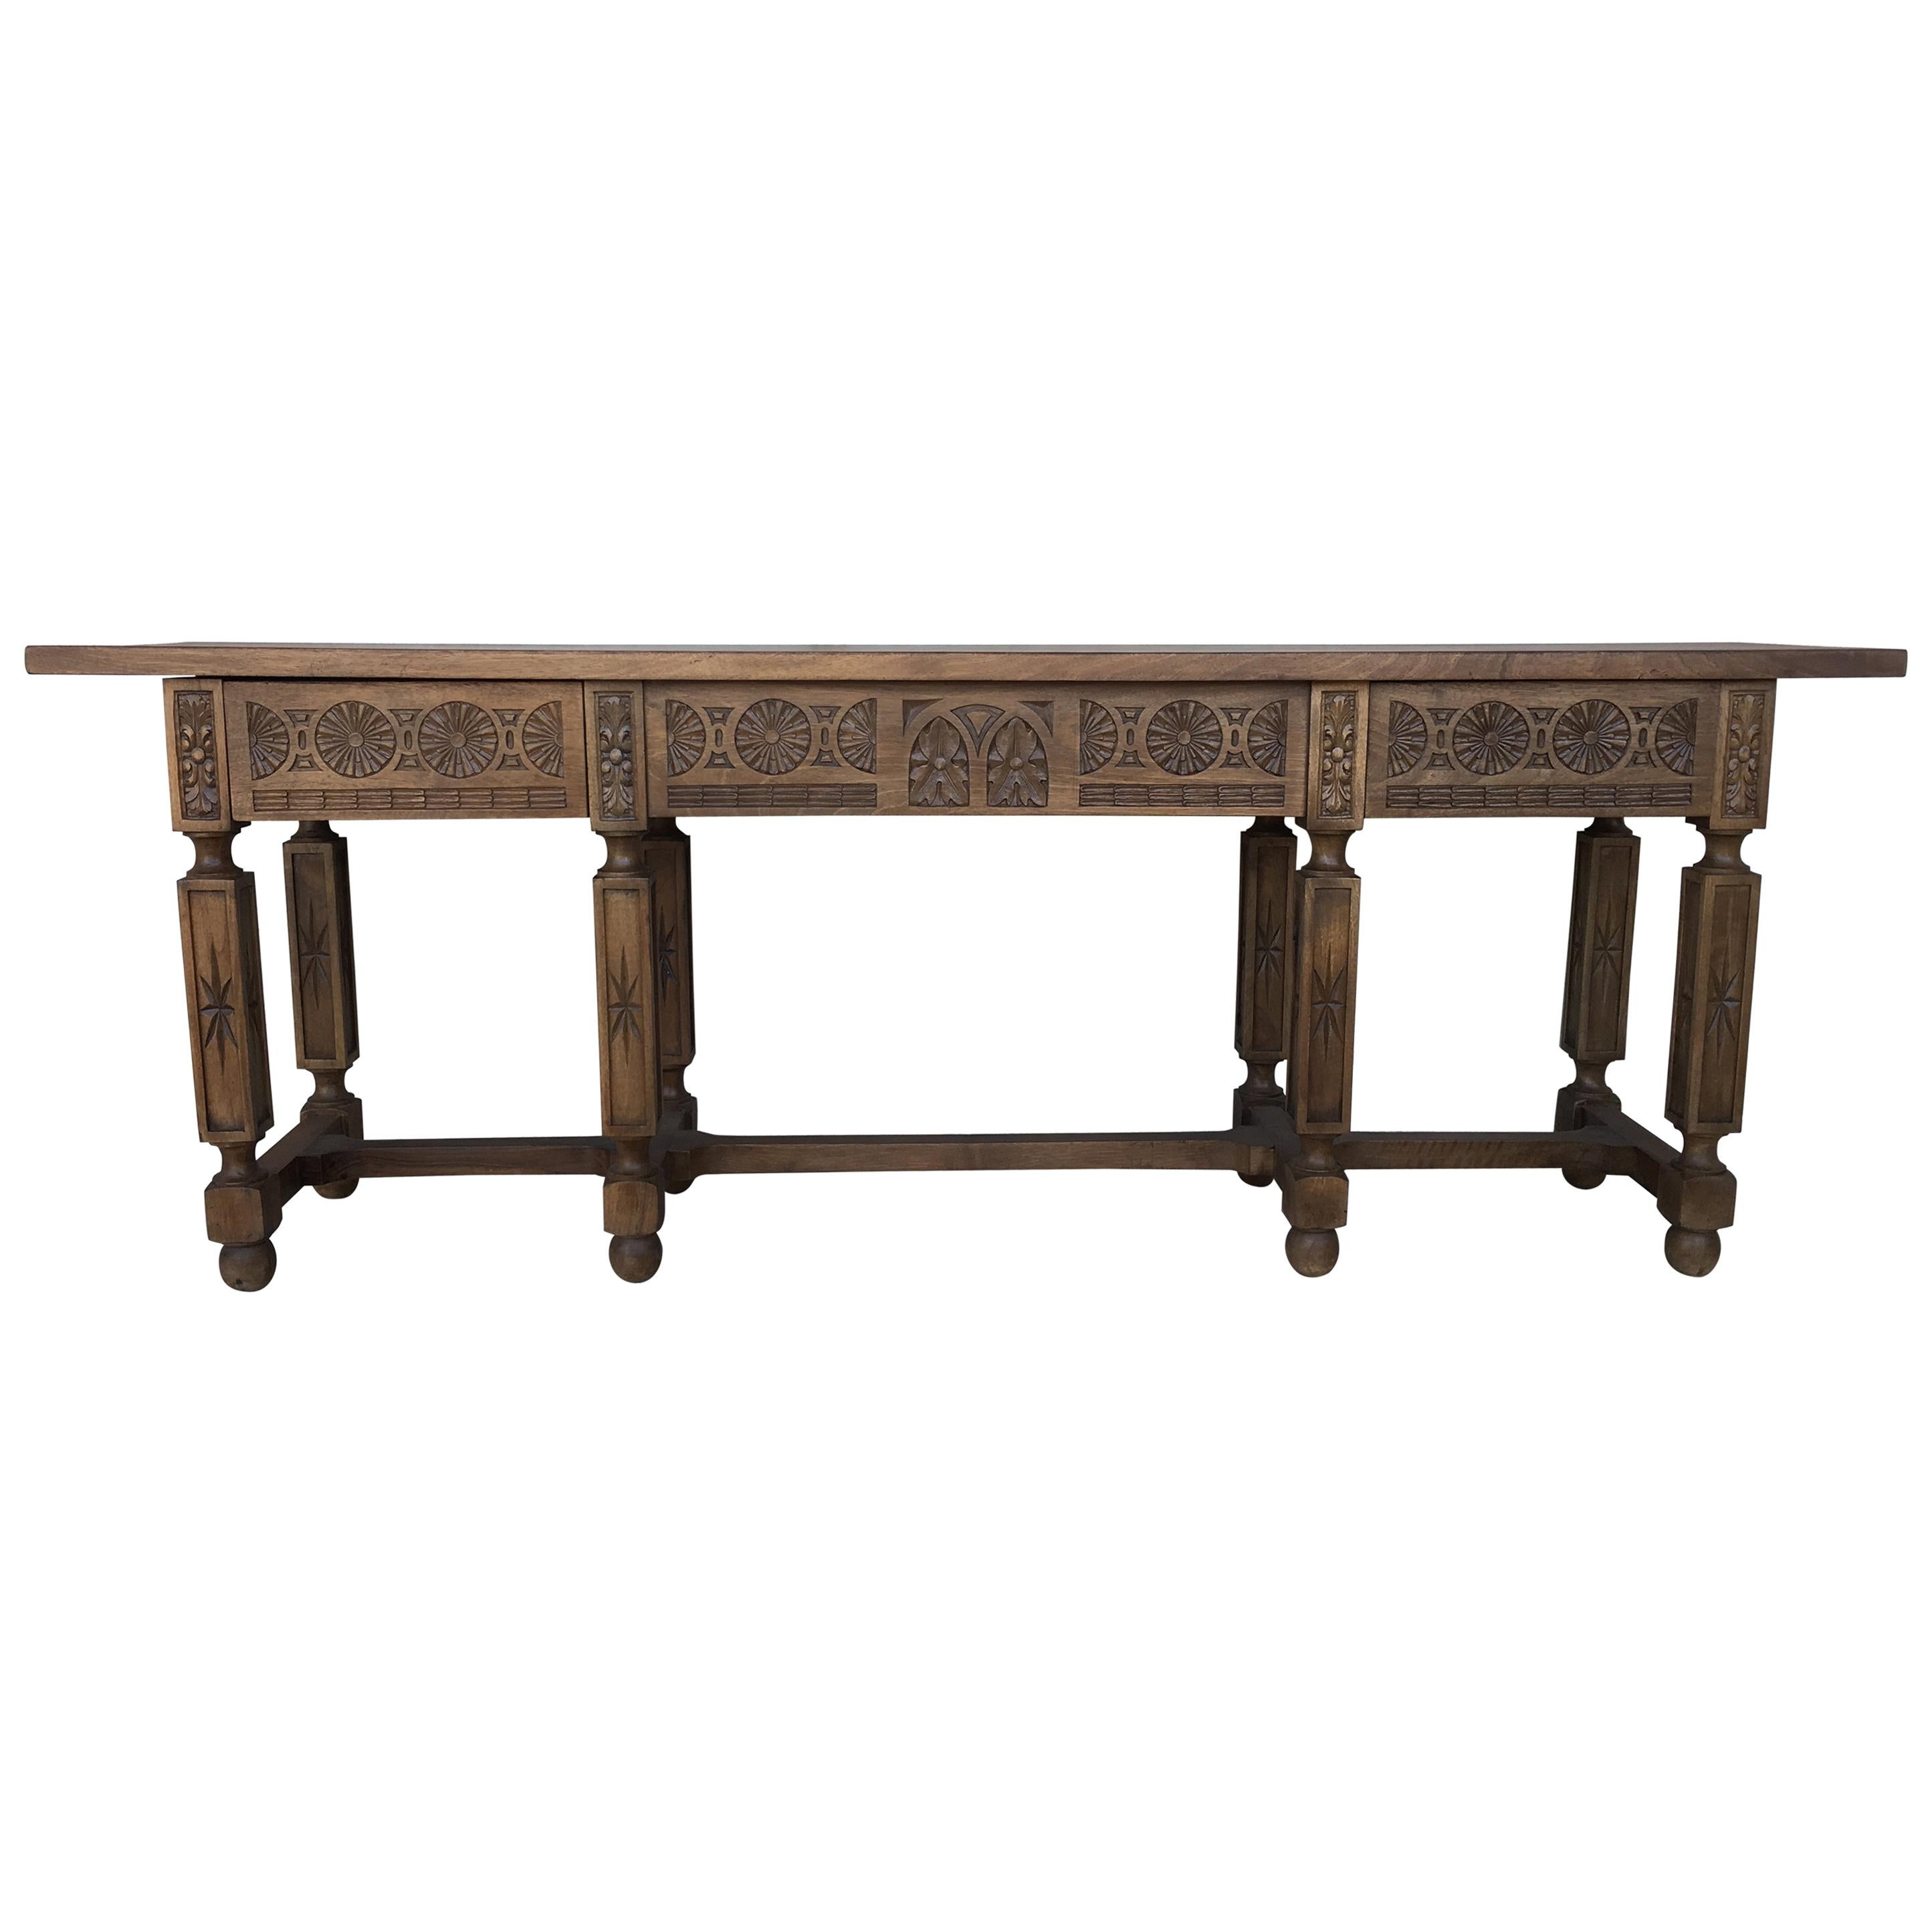 19th Century Spanish Carved Walnut Bench or Low Table with Two Drawers